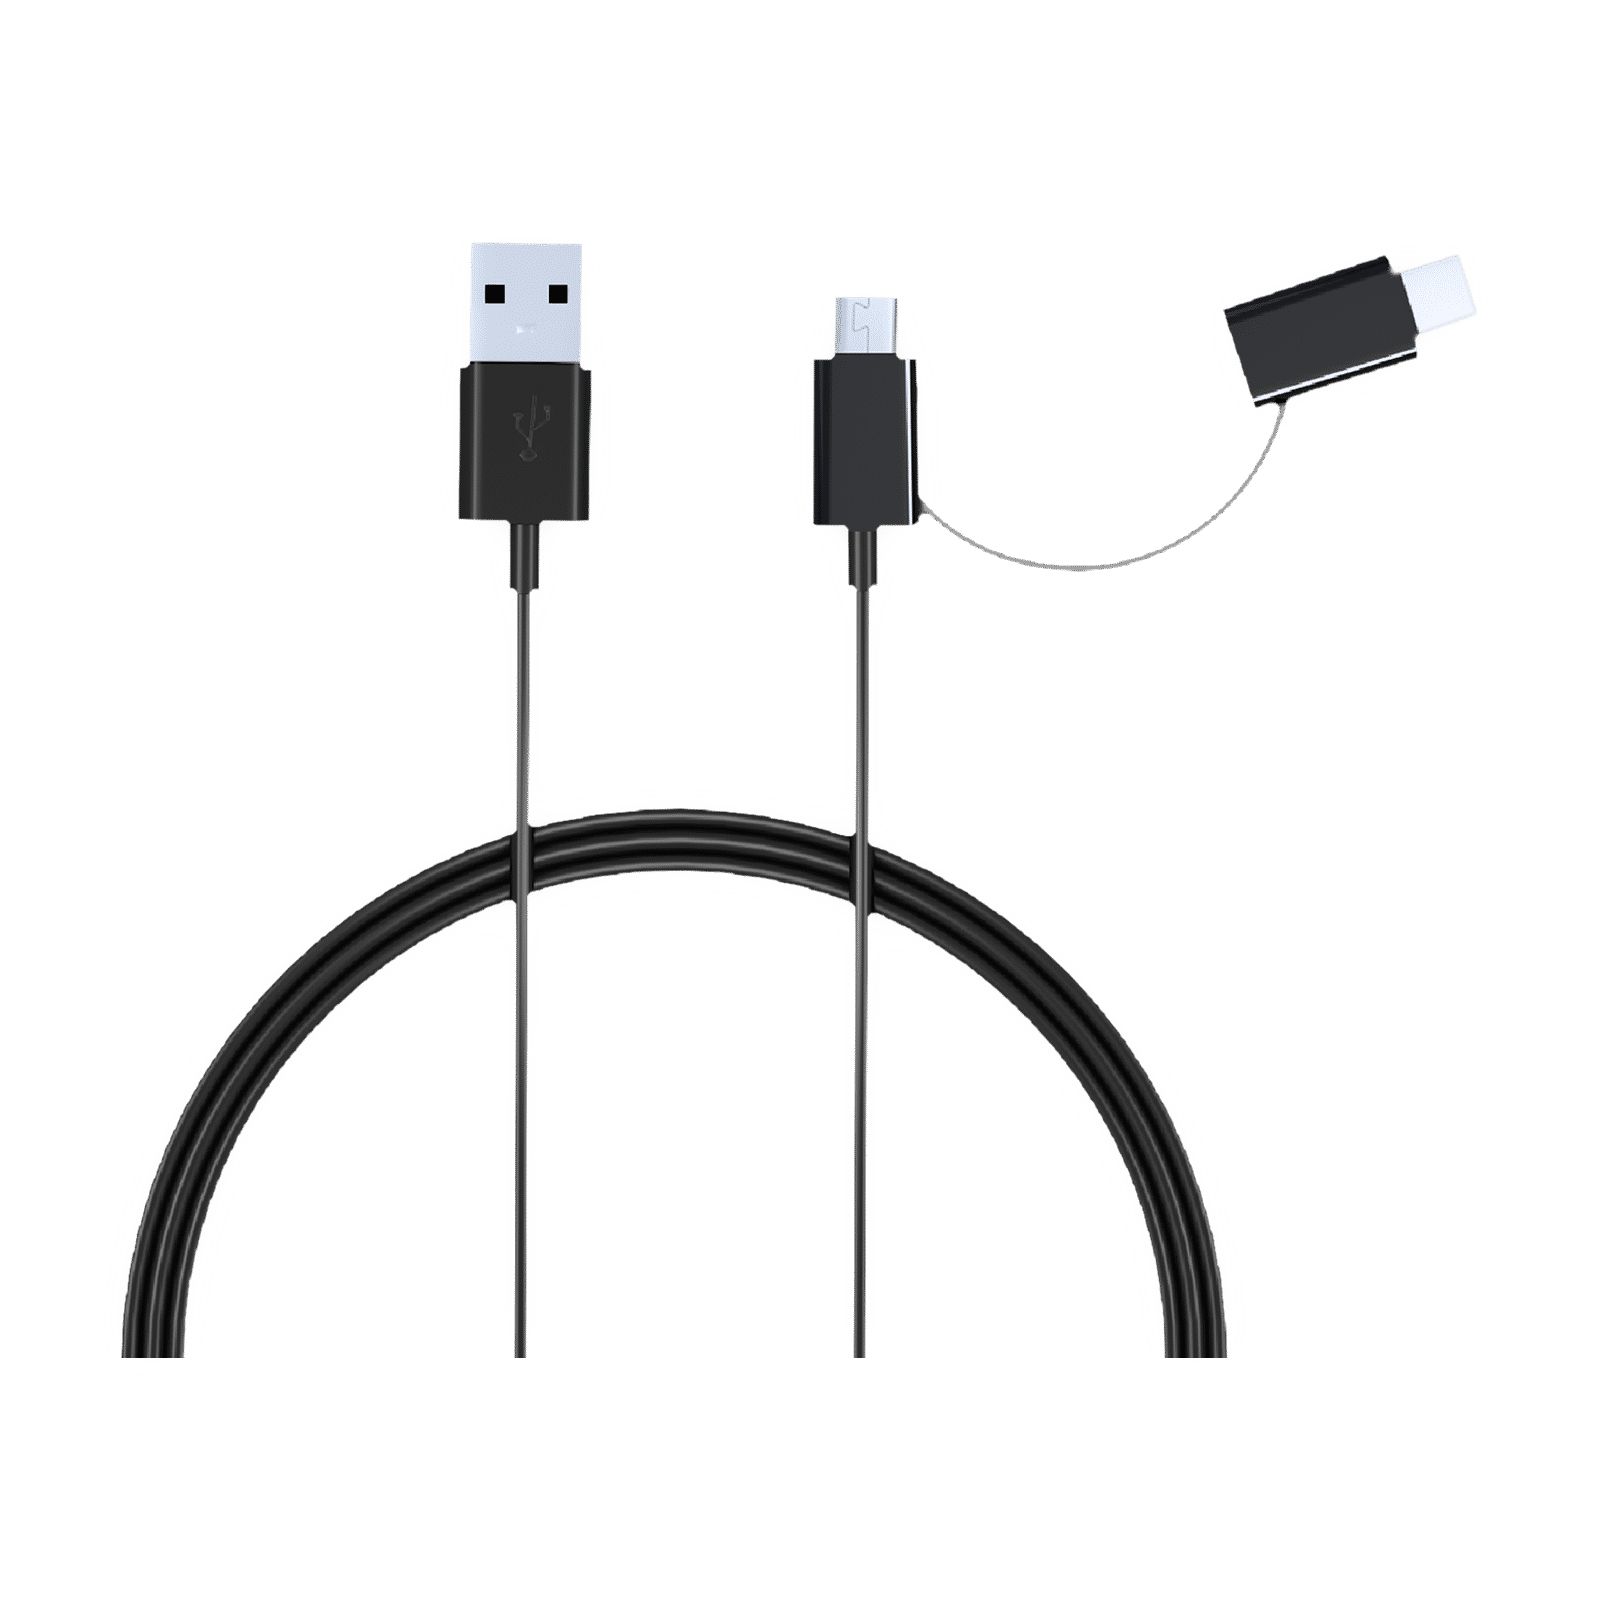 Cable Tipo C Usb 3.0 1metro Cromad